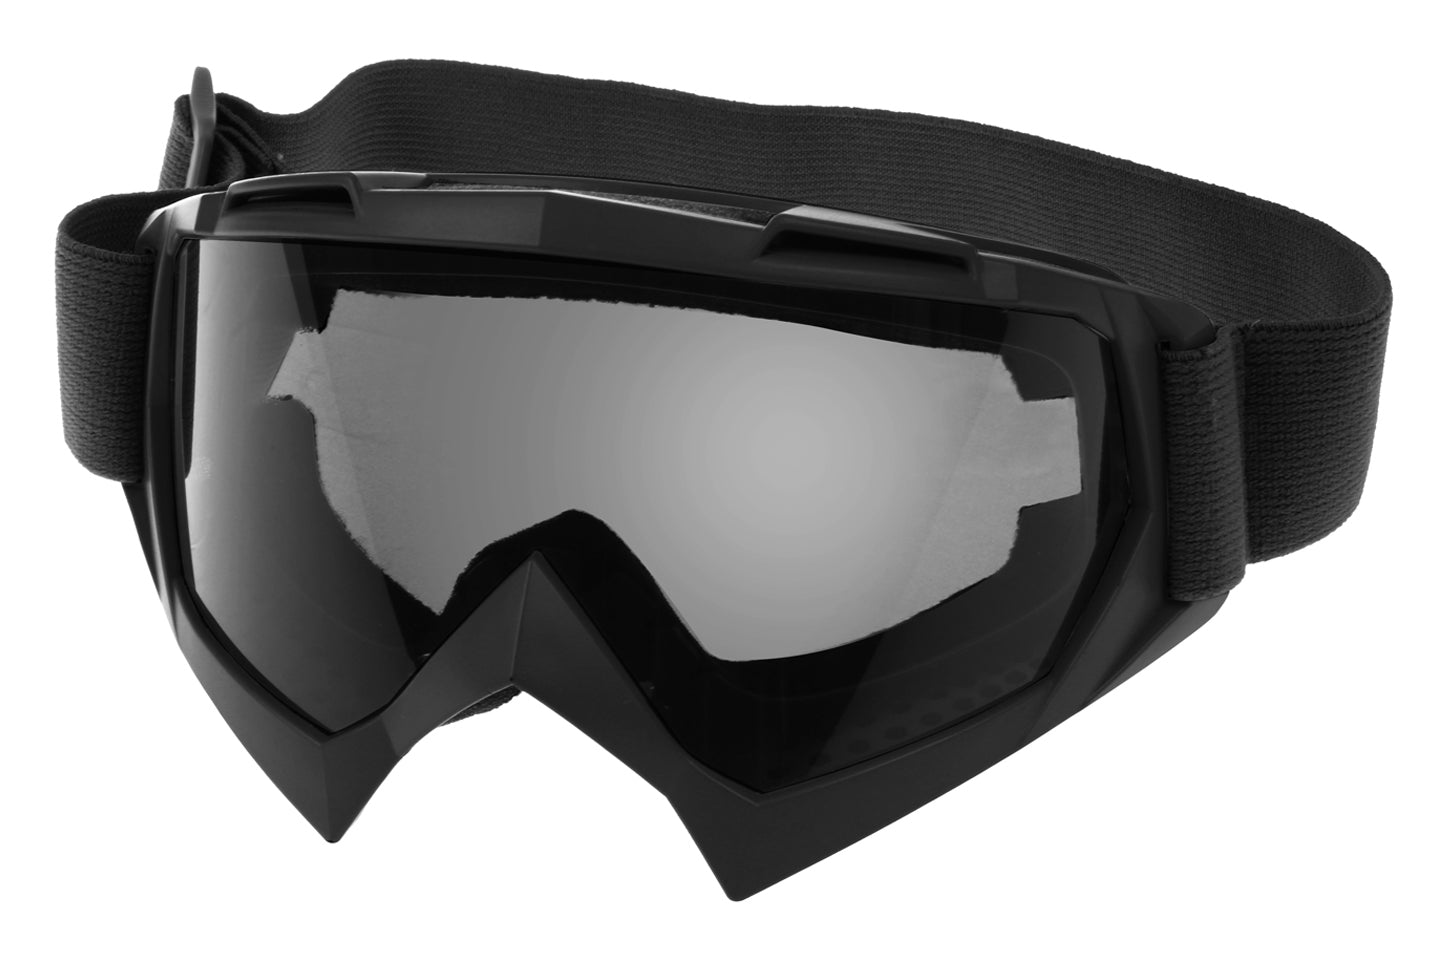 Over-The-Glasses Tactical Goggles - Rothco Adjustable OTG Eyewear Protection